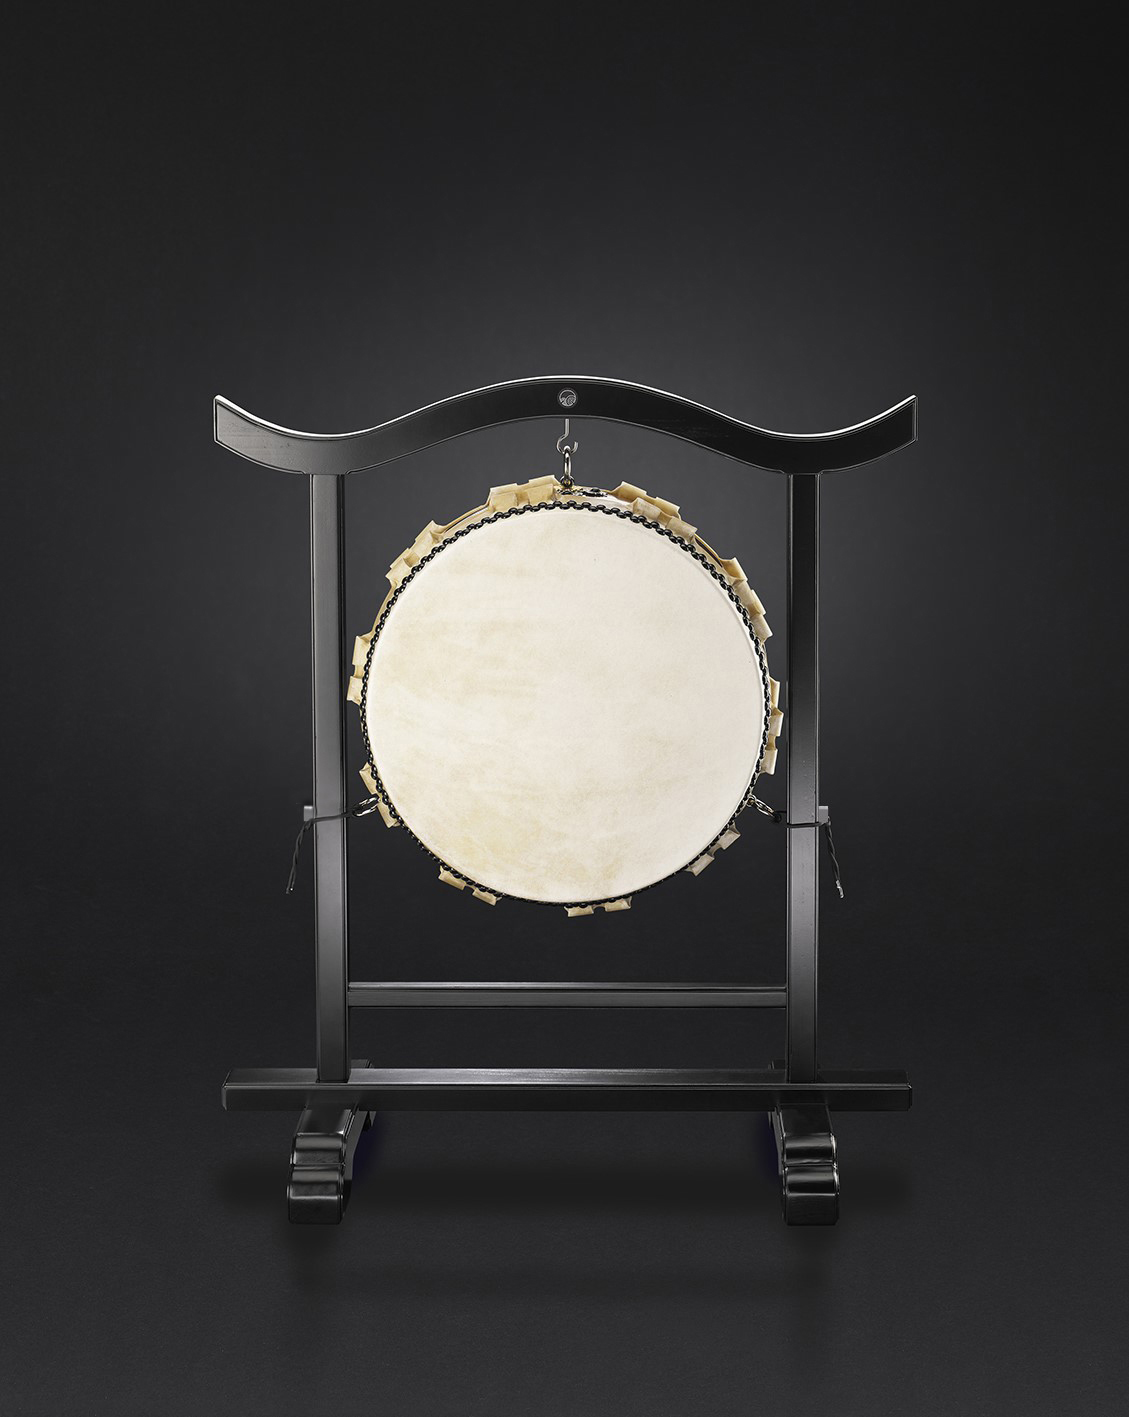 Hira-Daiko hq Ø48cm/h.25cm (680€) with temple stand (295€)